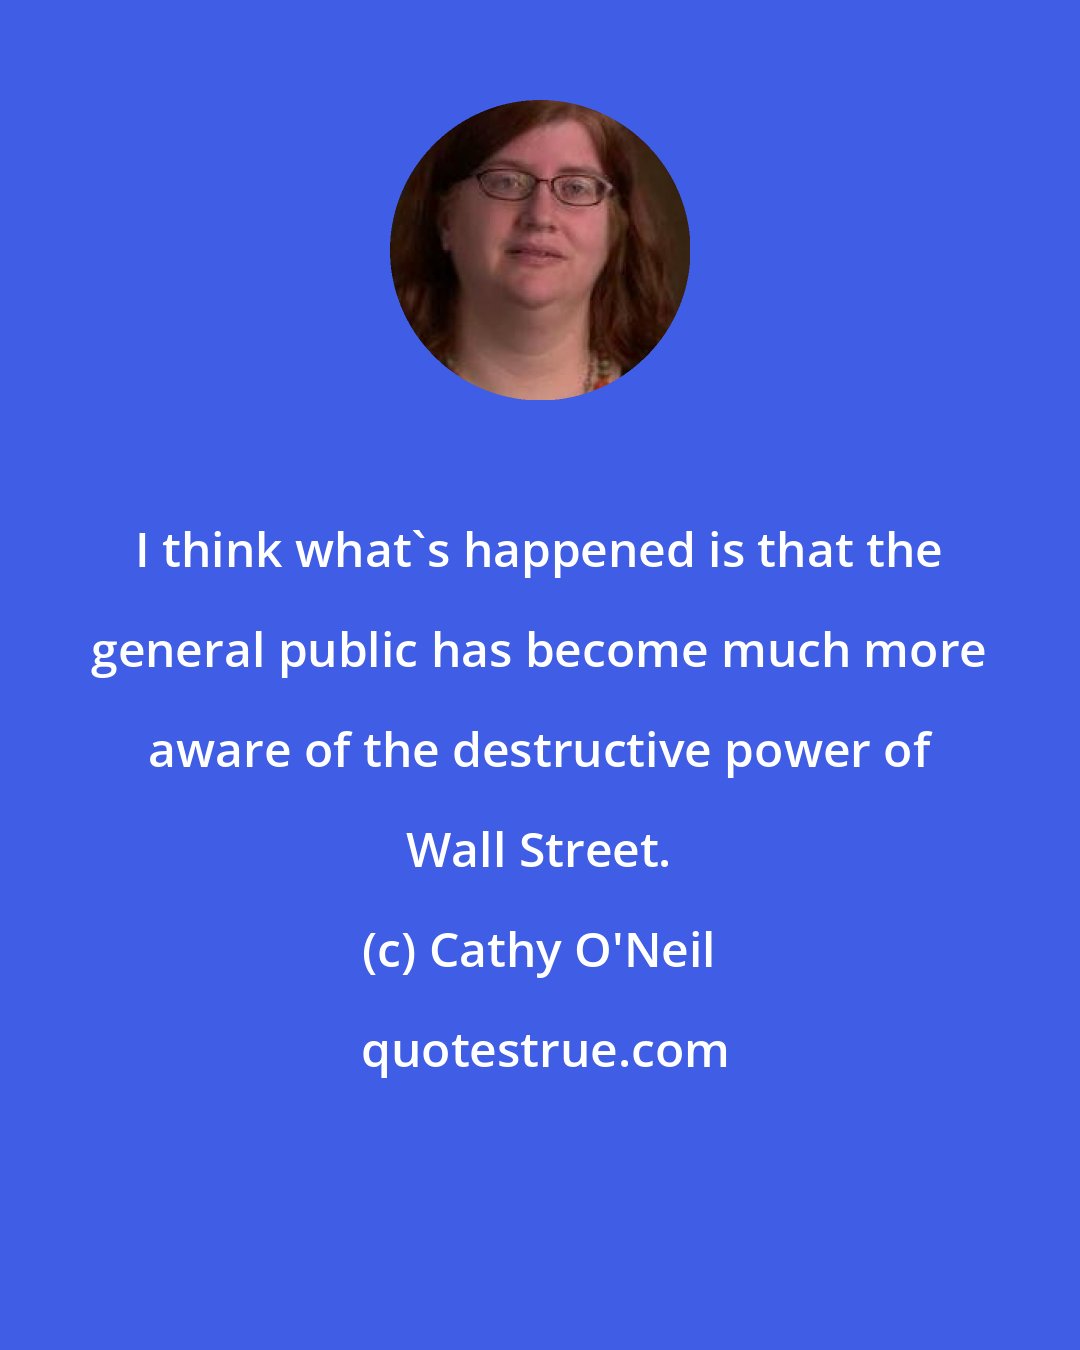 Cathy O'Neil: I think what's happened is that the general public has become much more aware of the destructive power of Wall Street.